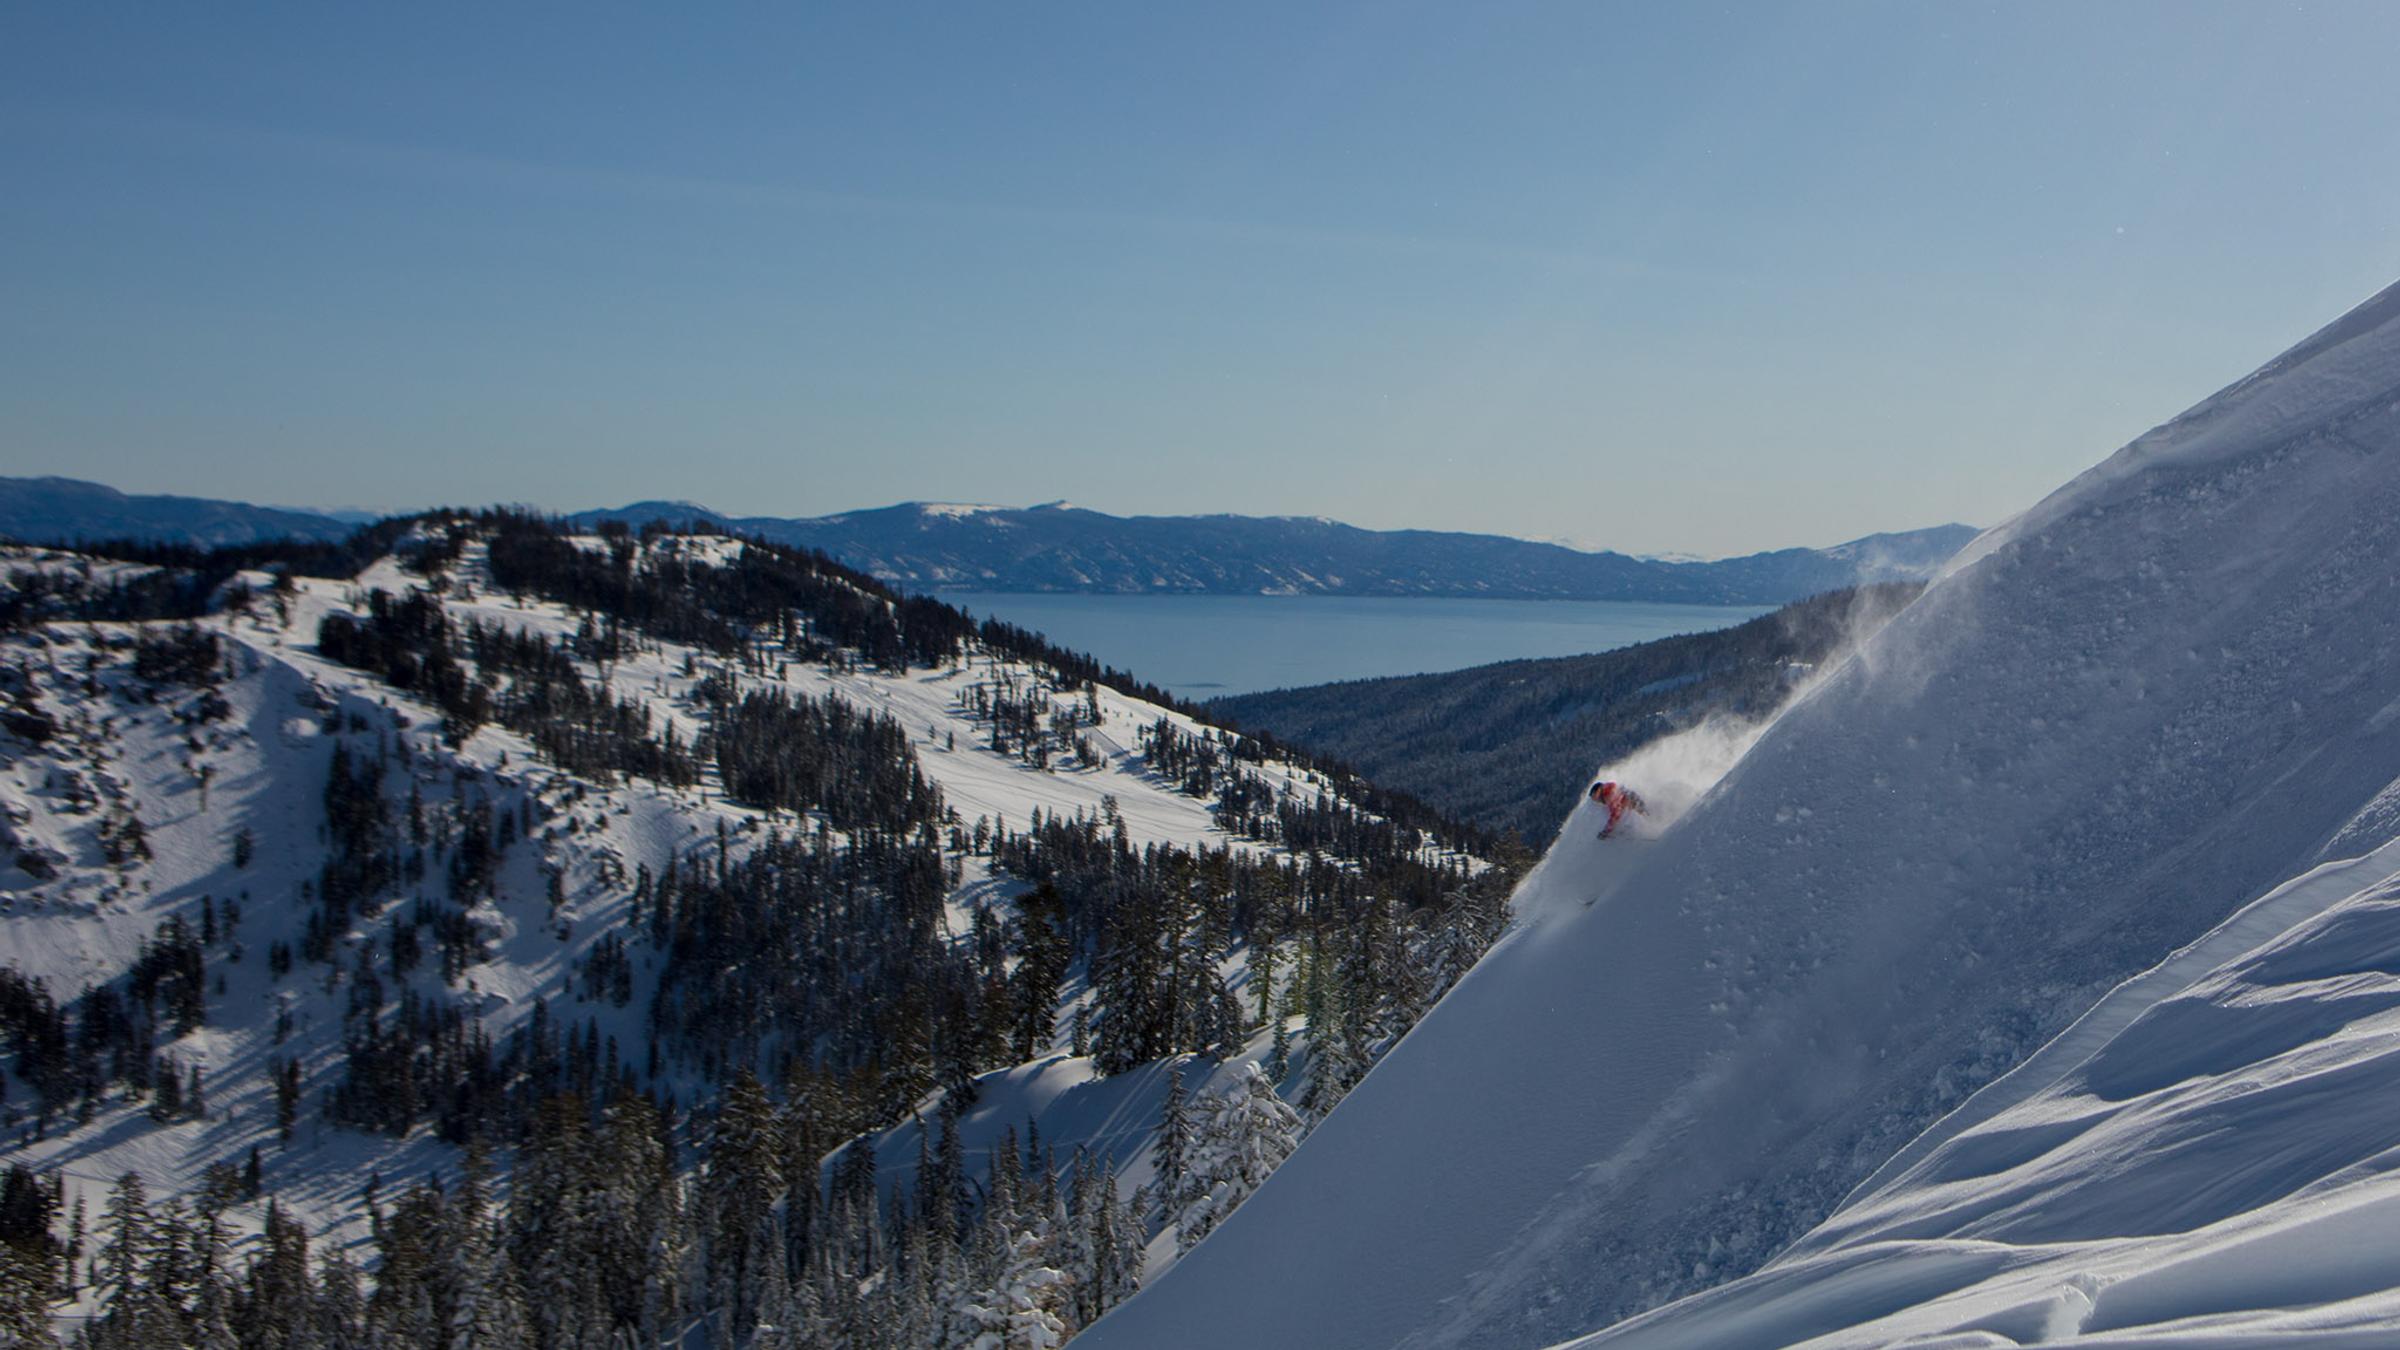 A skier skiing deep powder on a ridge line at Alpine Meadows with Lake Tahoe in the background